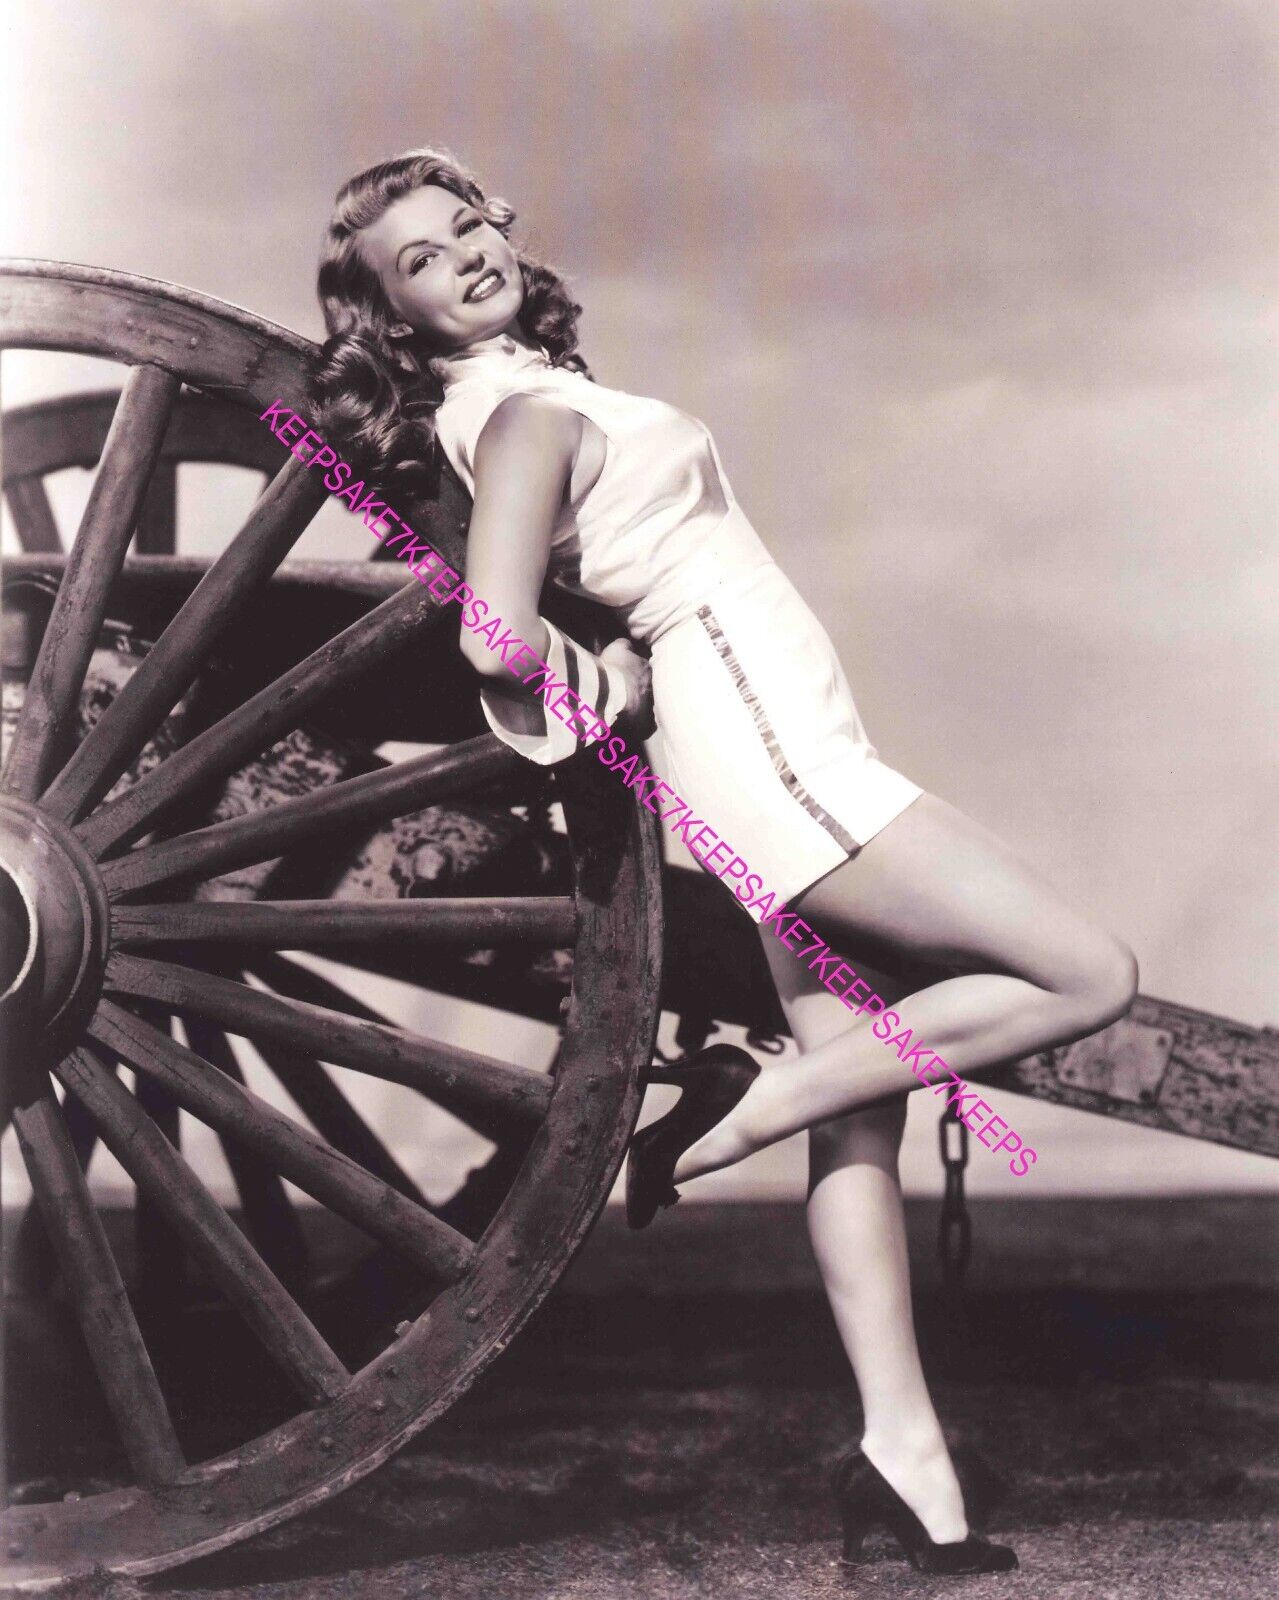 ACTRESS MARY CASTLE BEAUTIFUL AND LEGGY IN A SHORT DRESS 8 X 10 PHOTO A-MCAS2